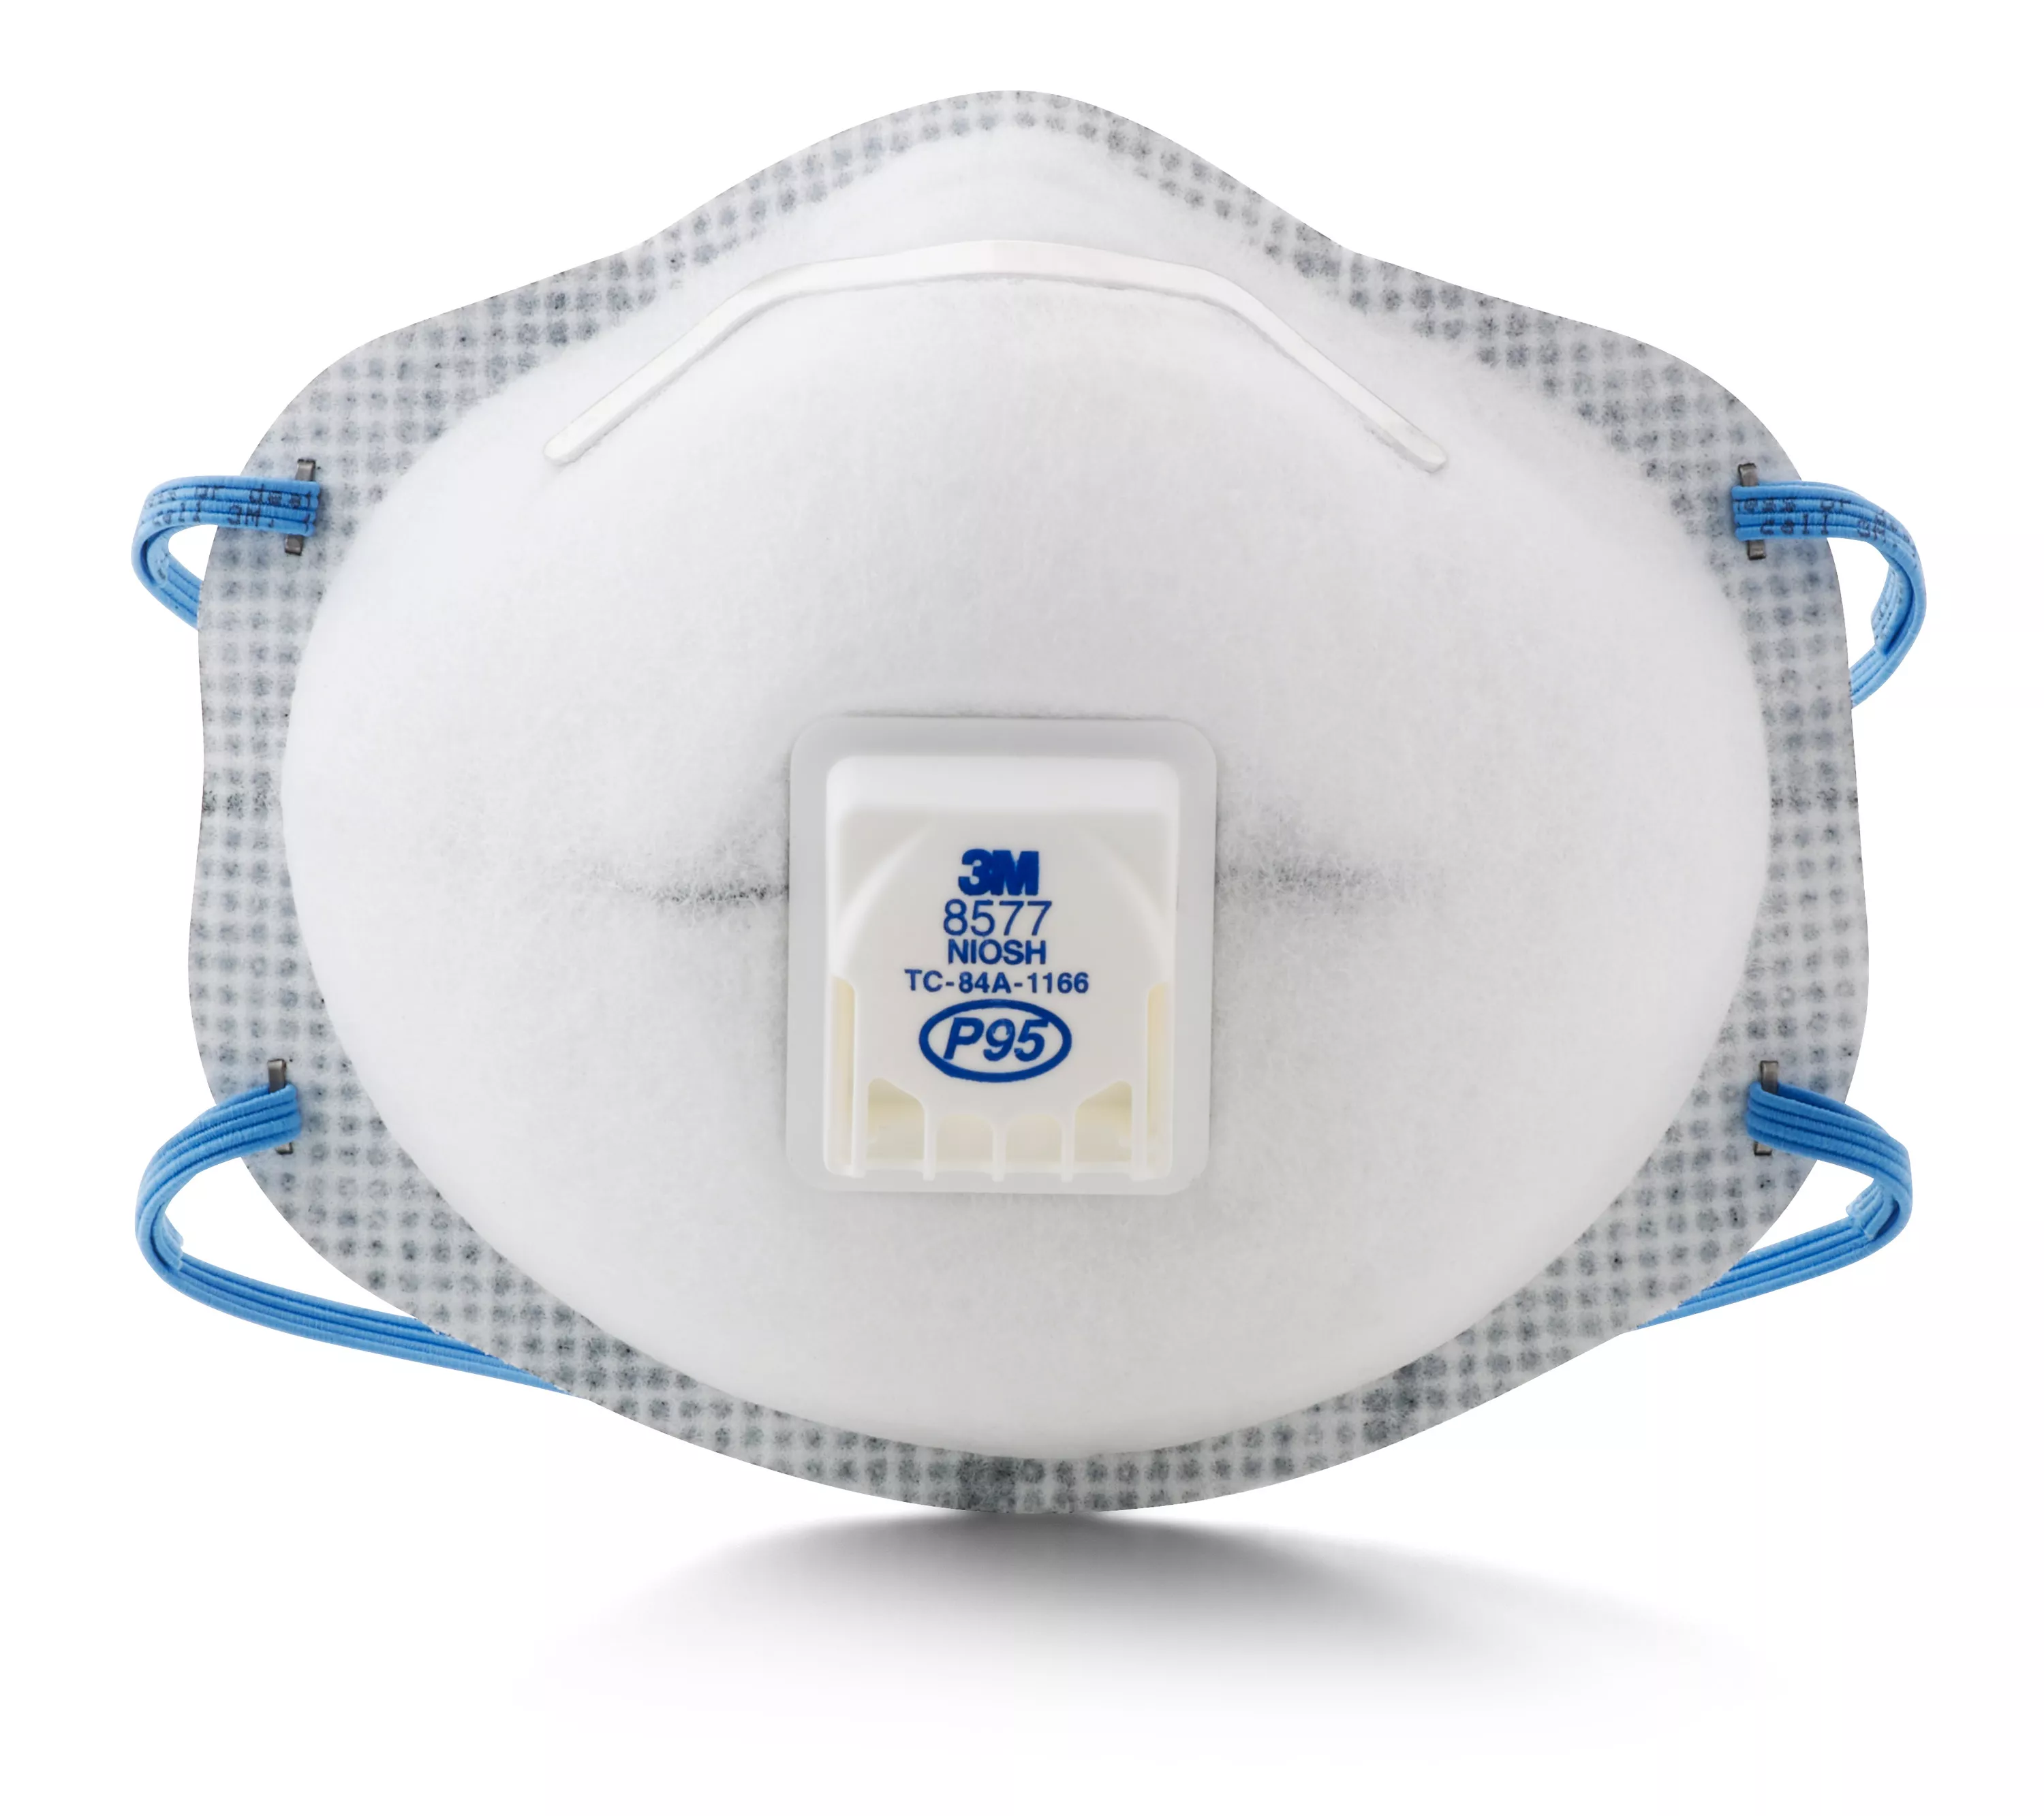 3M™ Particulate Respirator 8577, P95, with Nuisance Level Organic Vapor
Relief 80 EA/Case